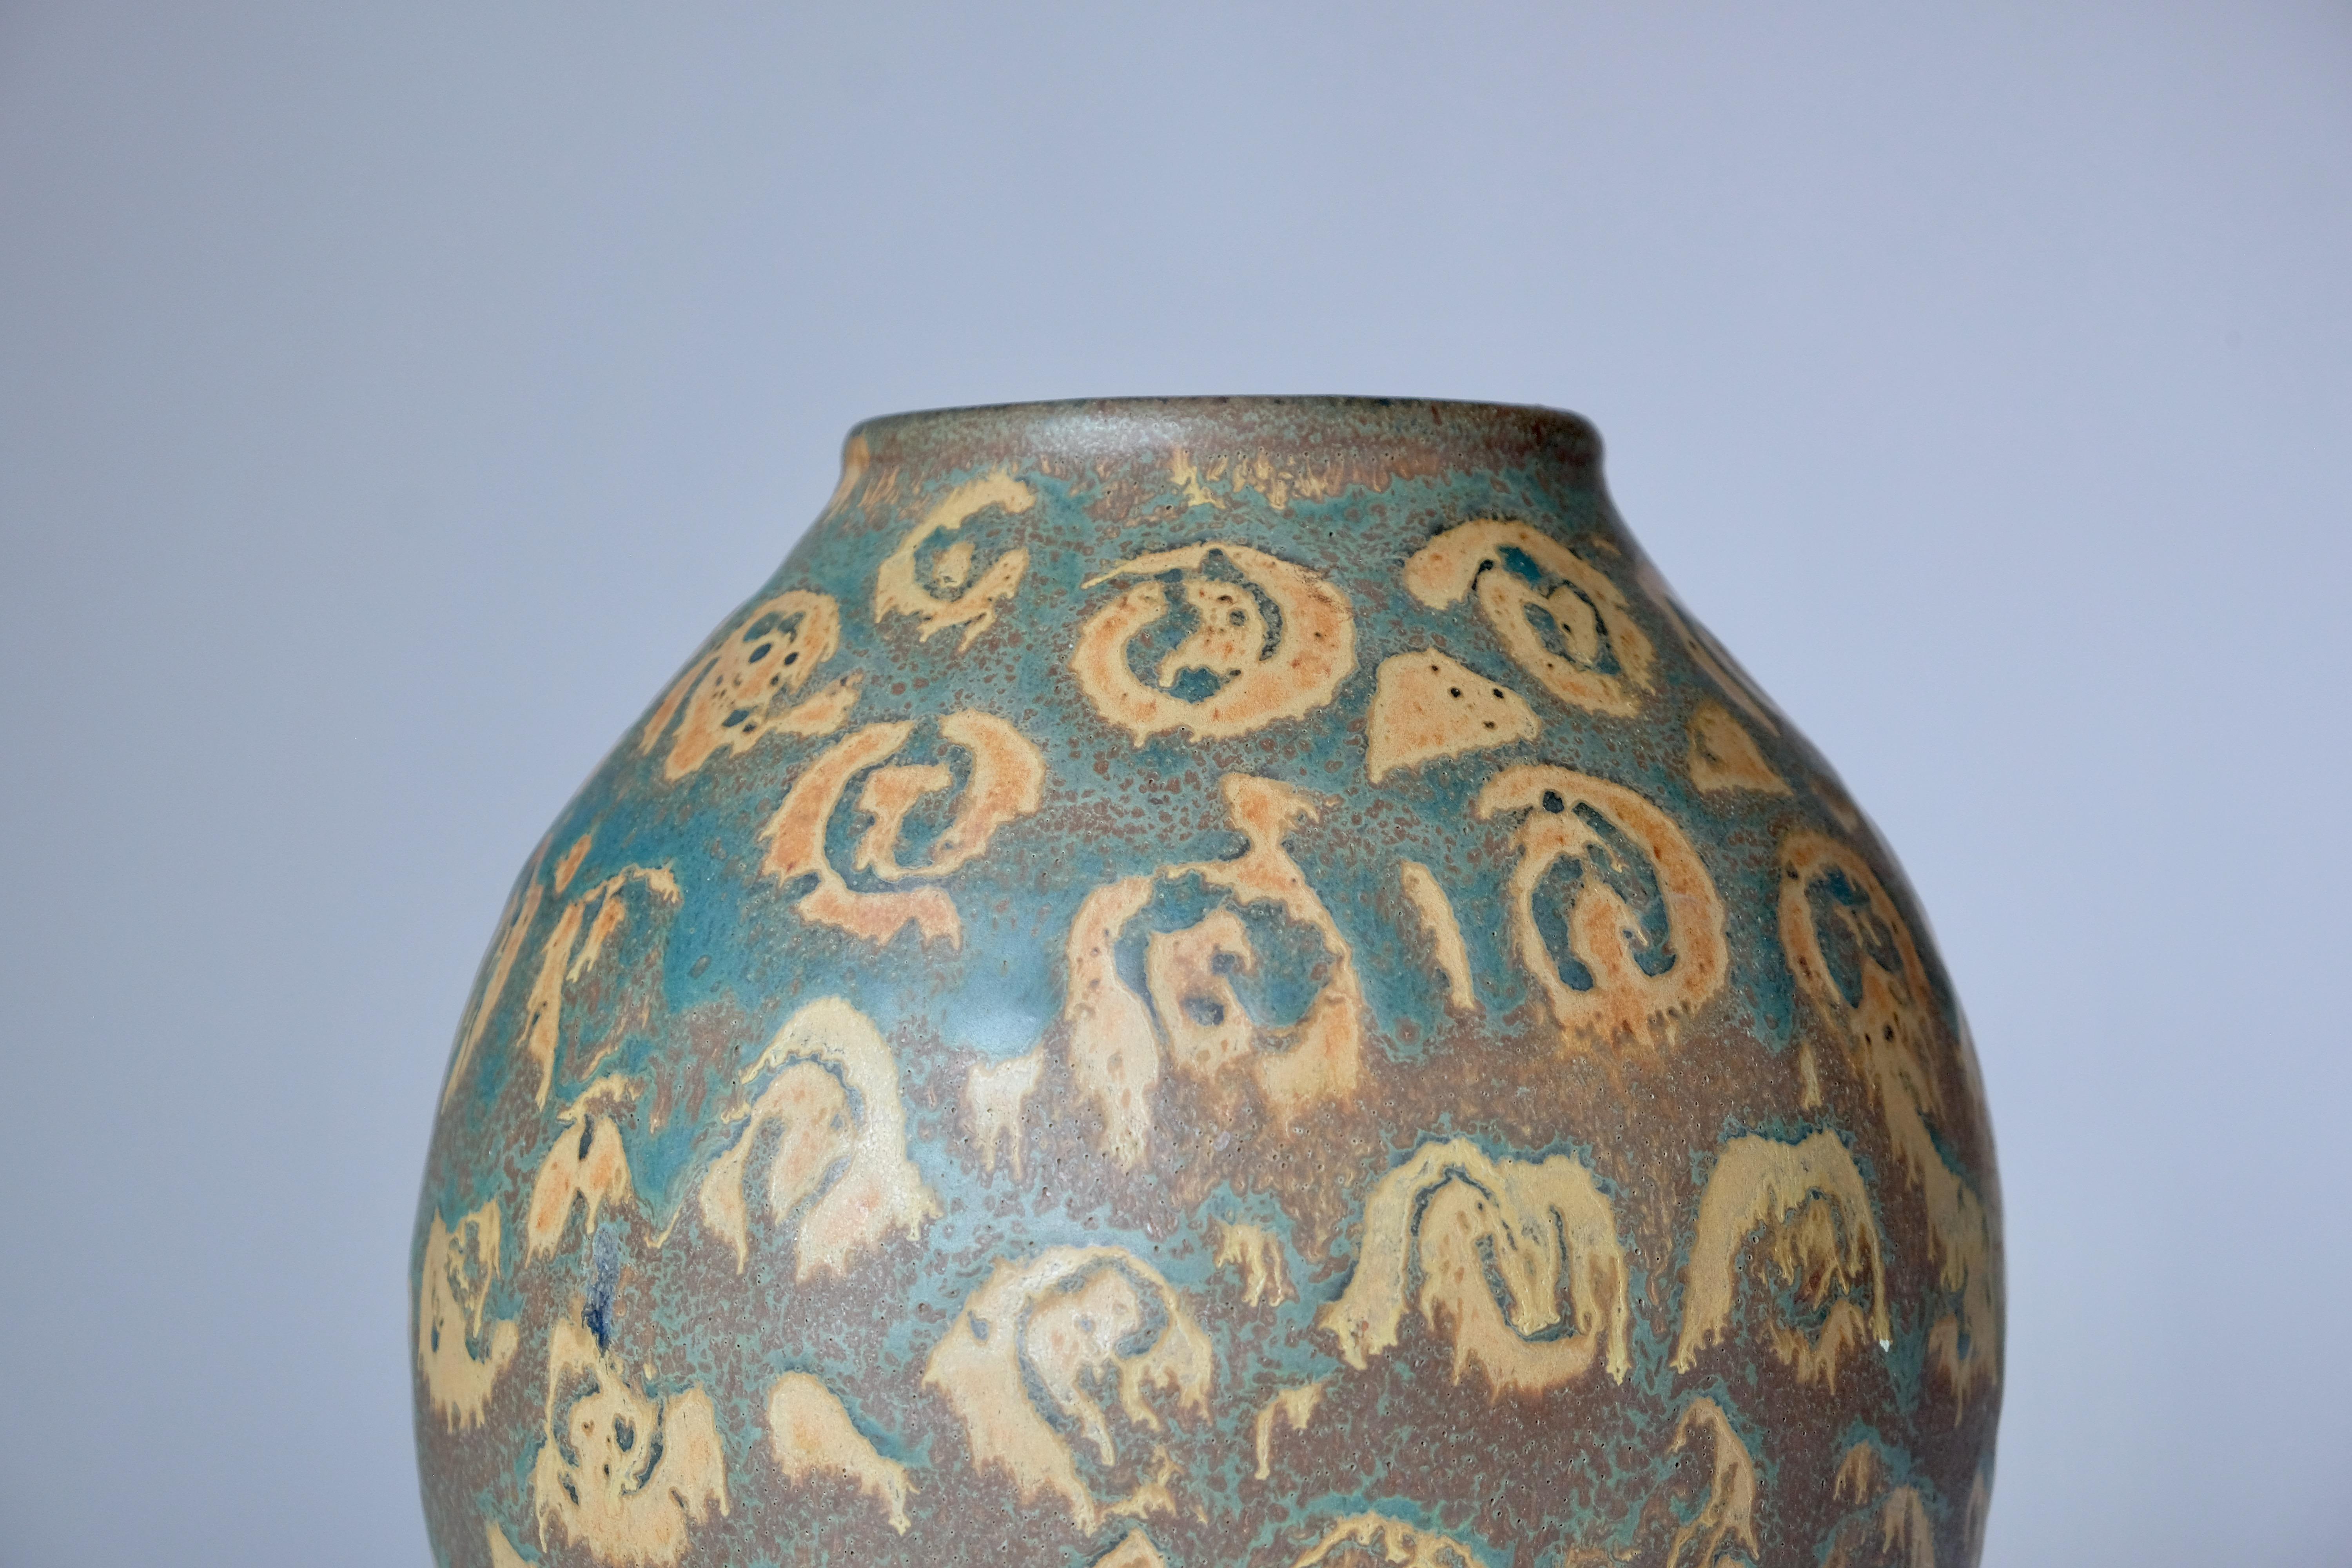 Large vase with exceptional glaze pattern. In excellent vintage condition. 